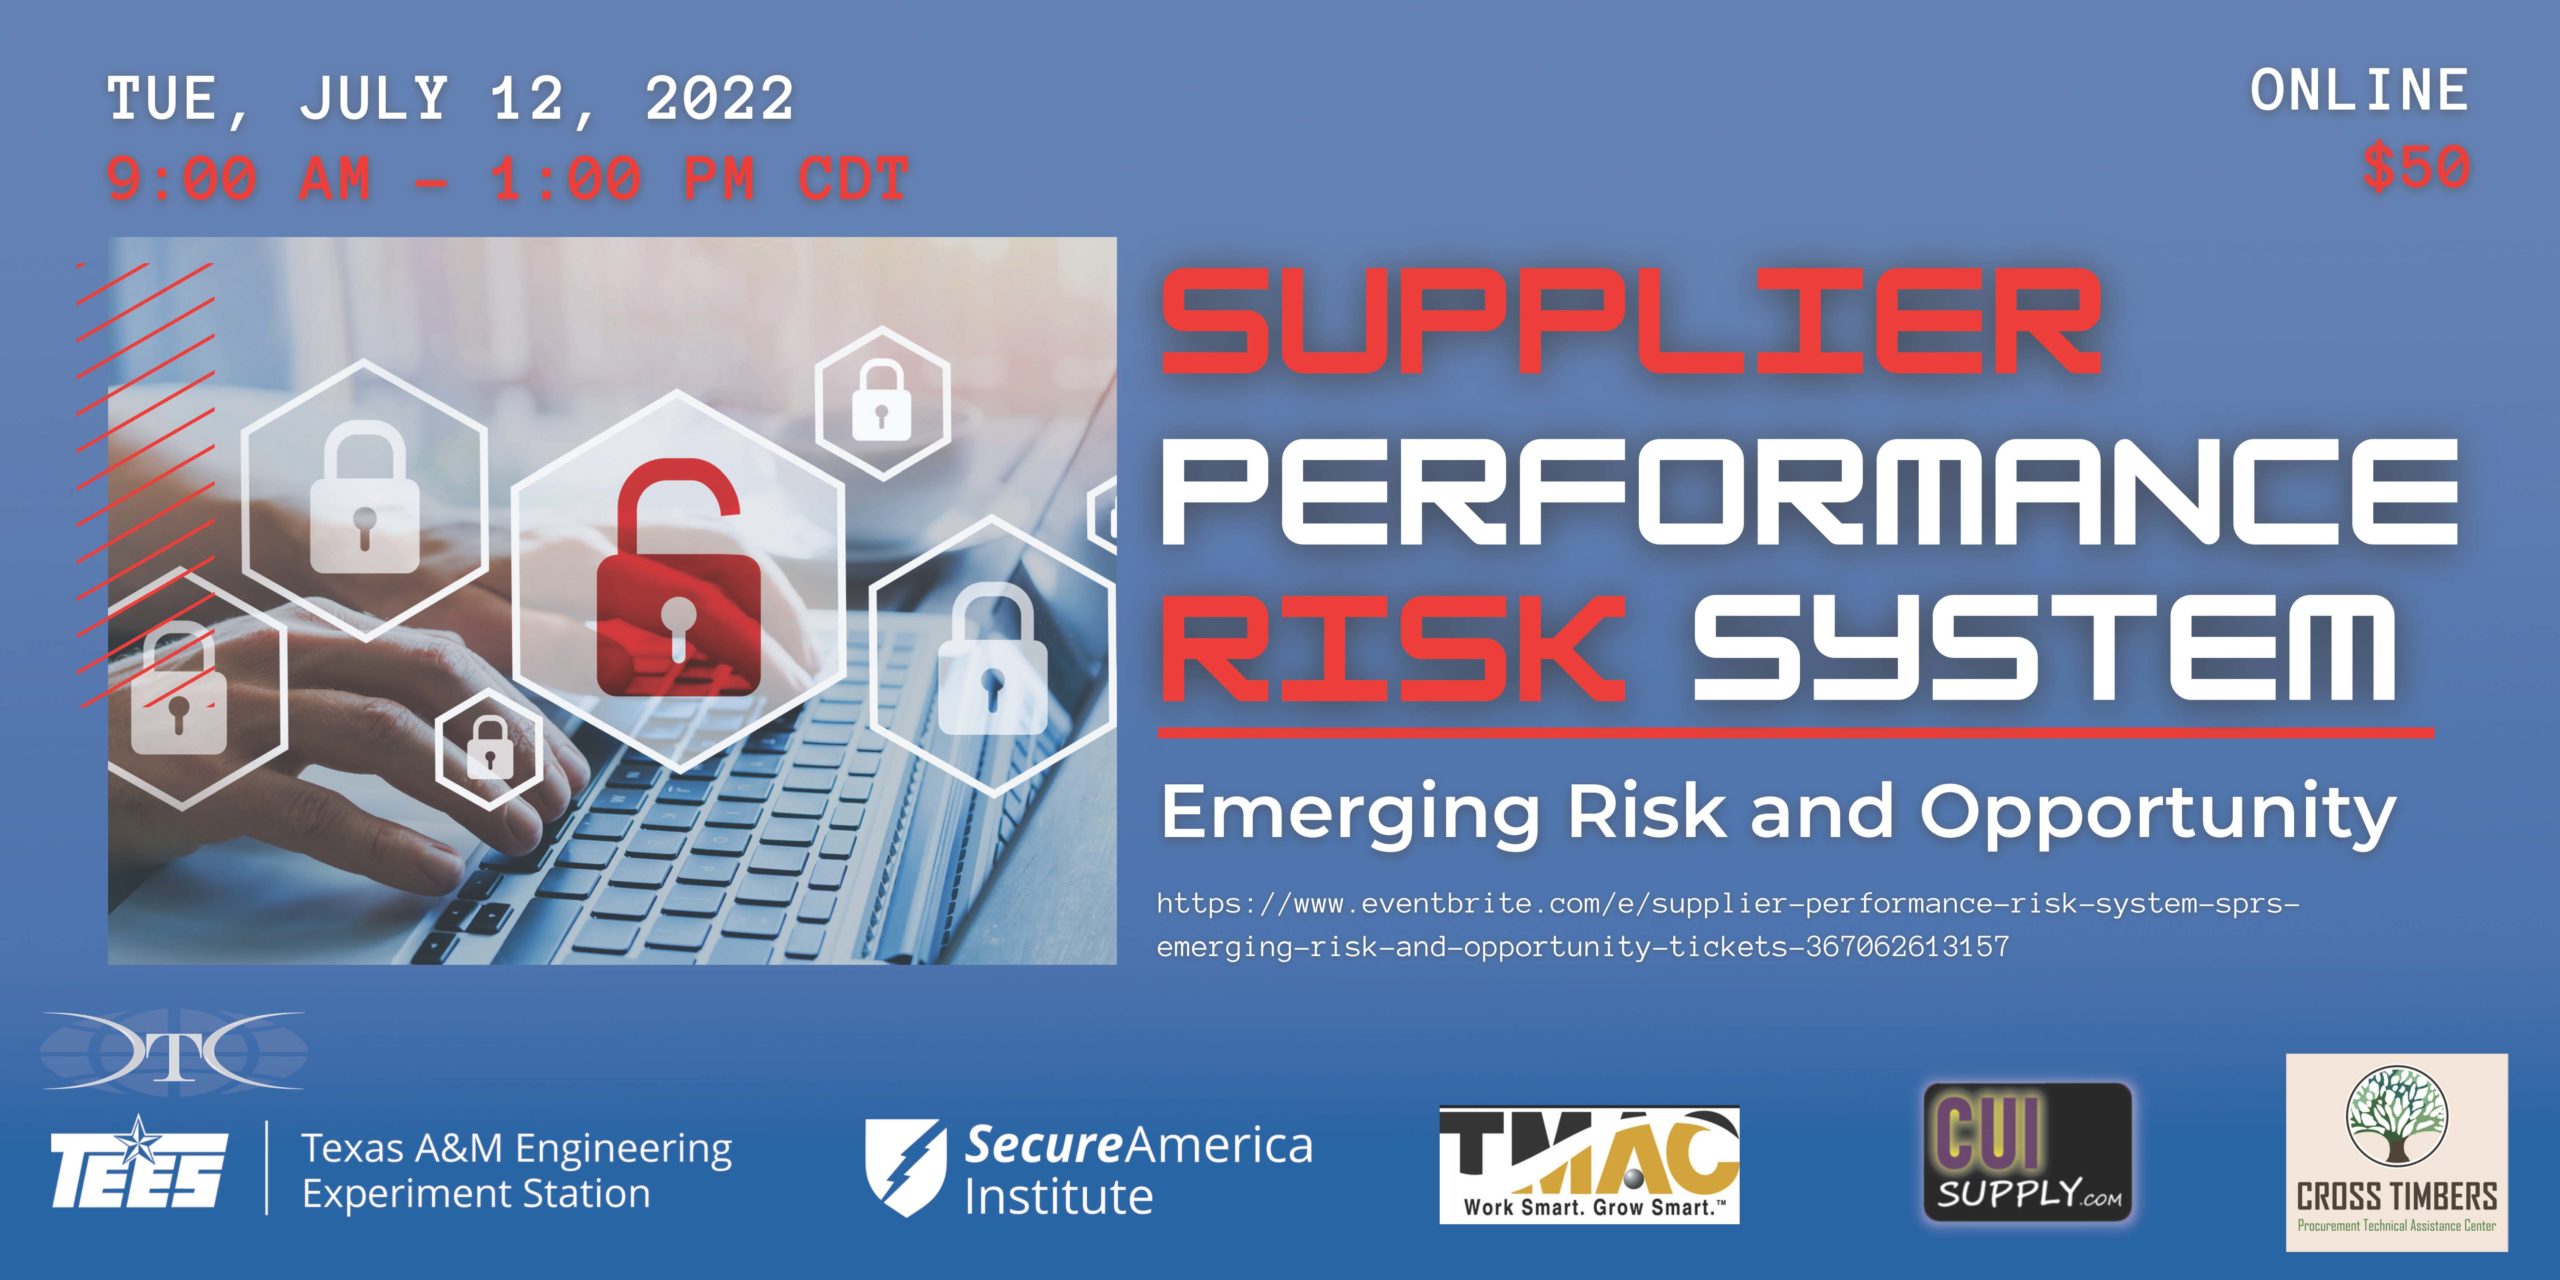 Supplier performance risk system, emerging risk and opportunity event on Tuesday, July 12th from 9:00 a.m.-1:00 p.m. CDT. Registration is $50